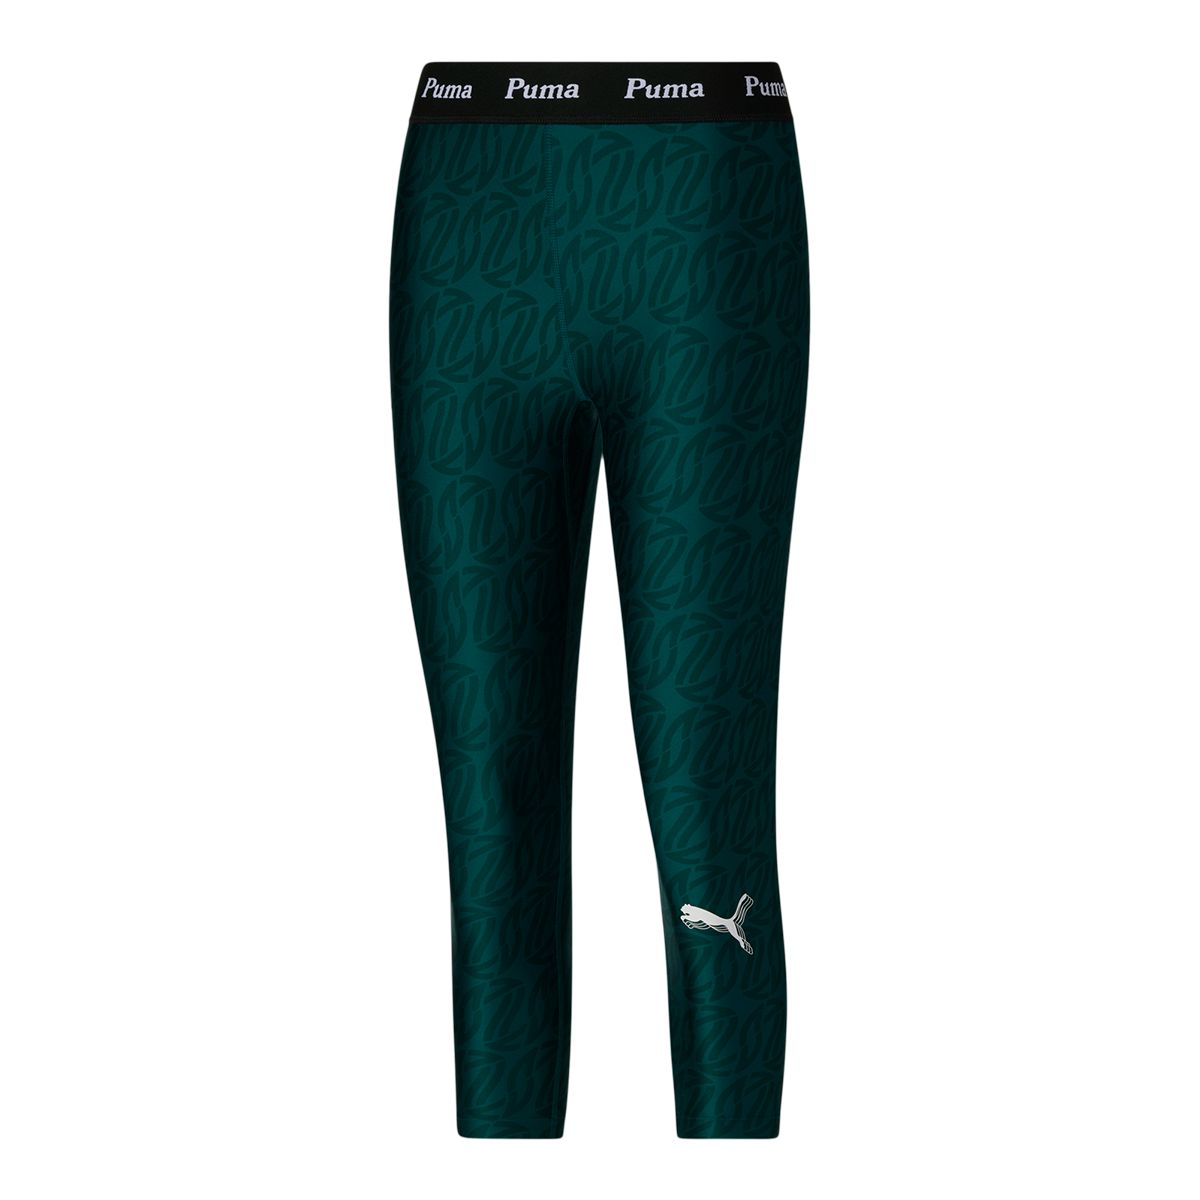 Buy Dark Green Cotton Jersey Lycra Tights Online - W for Woman